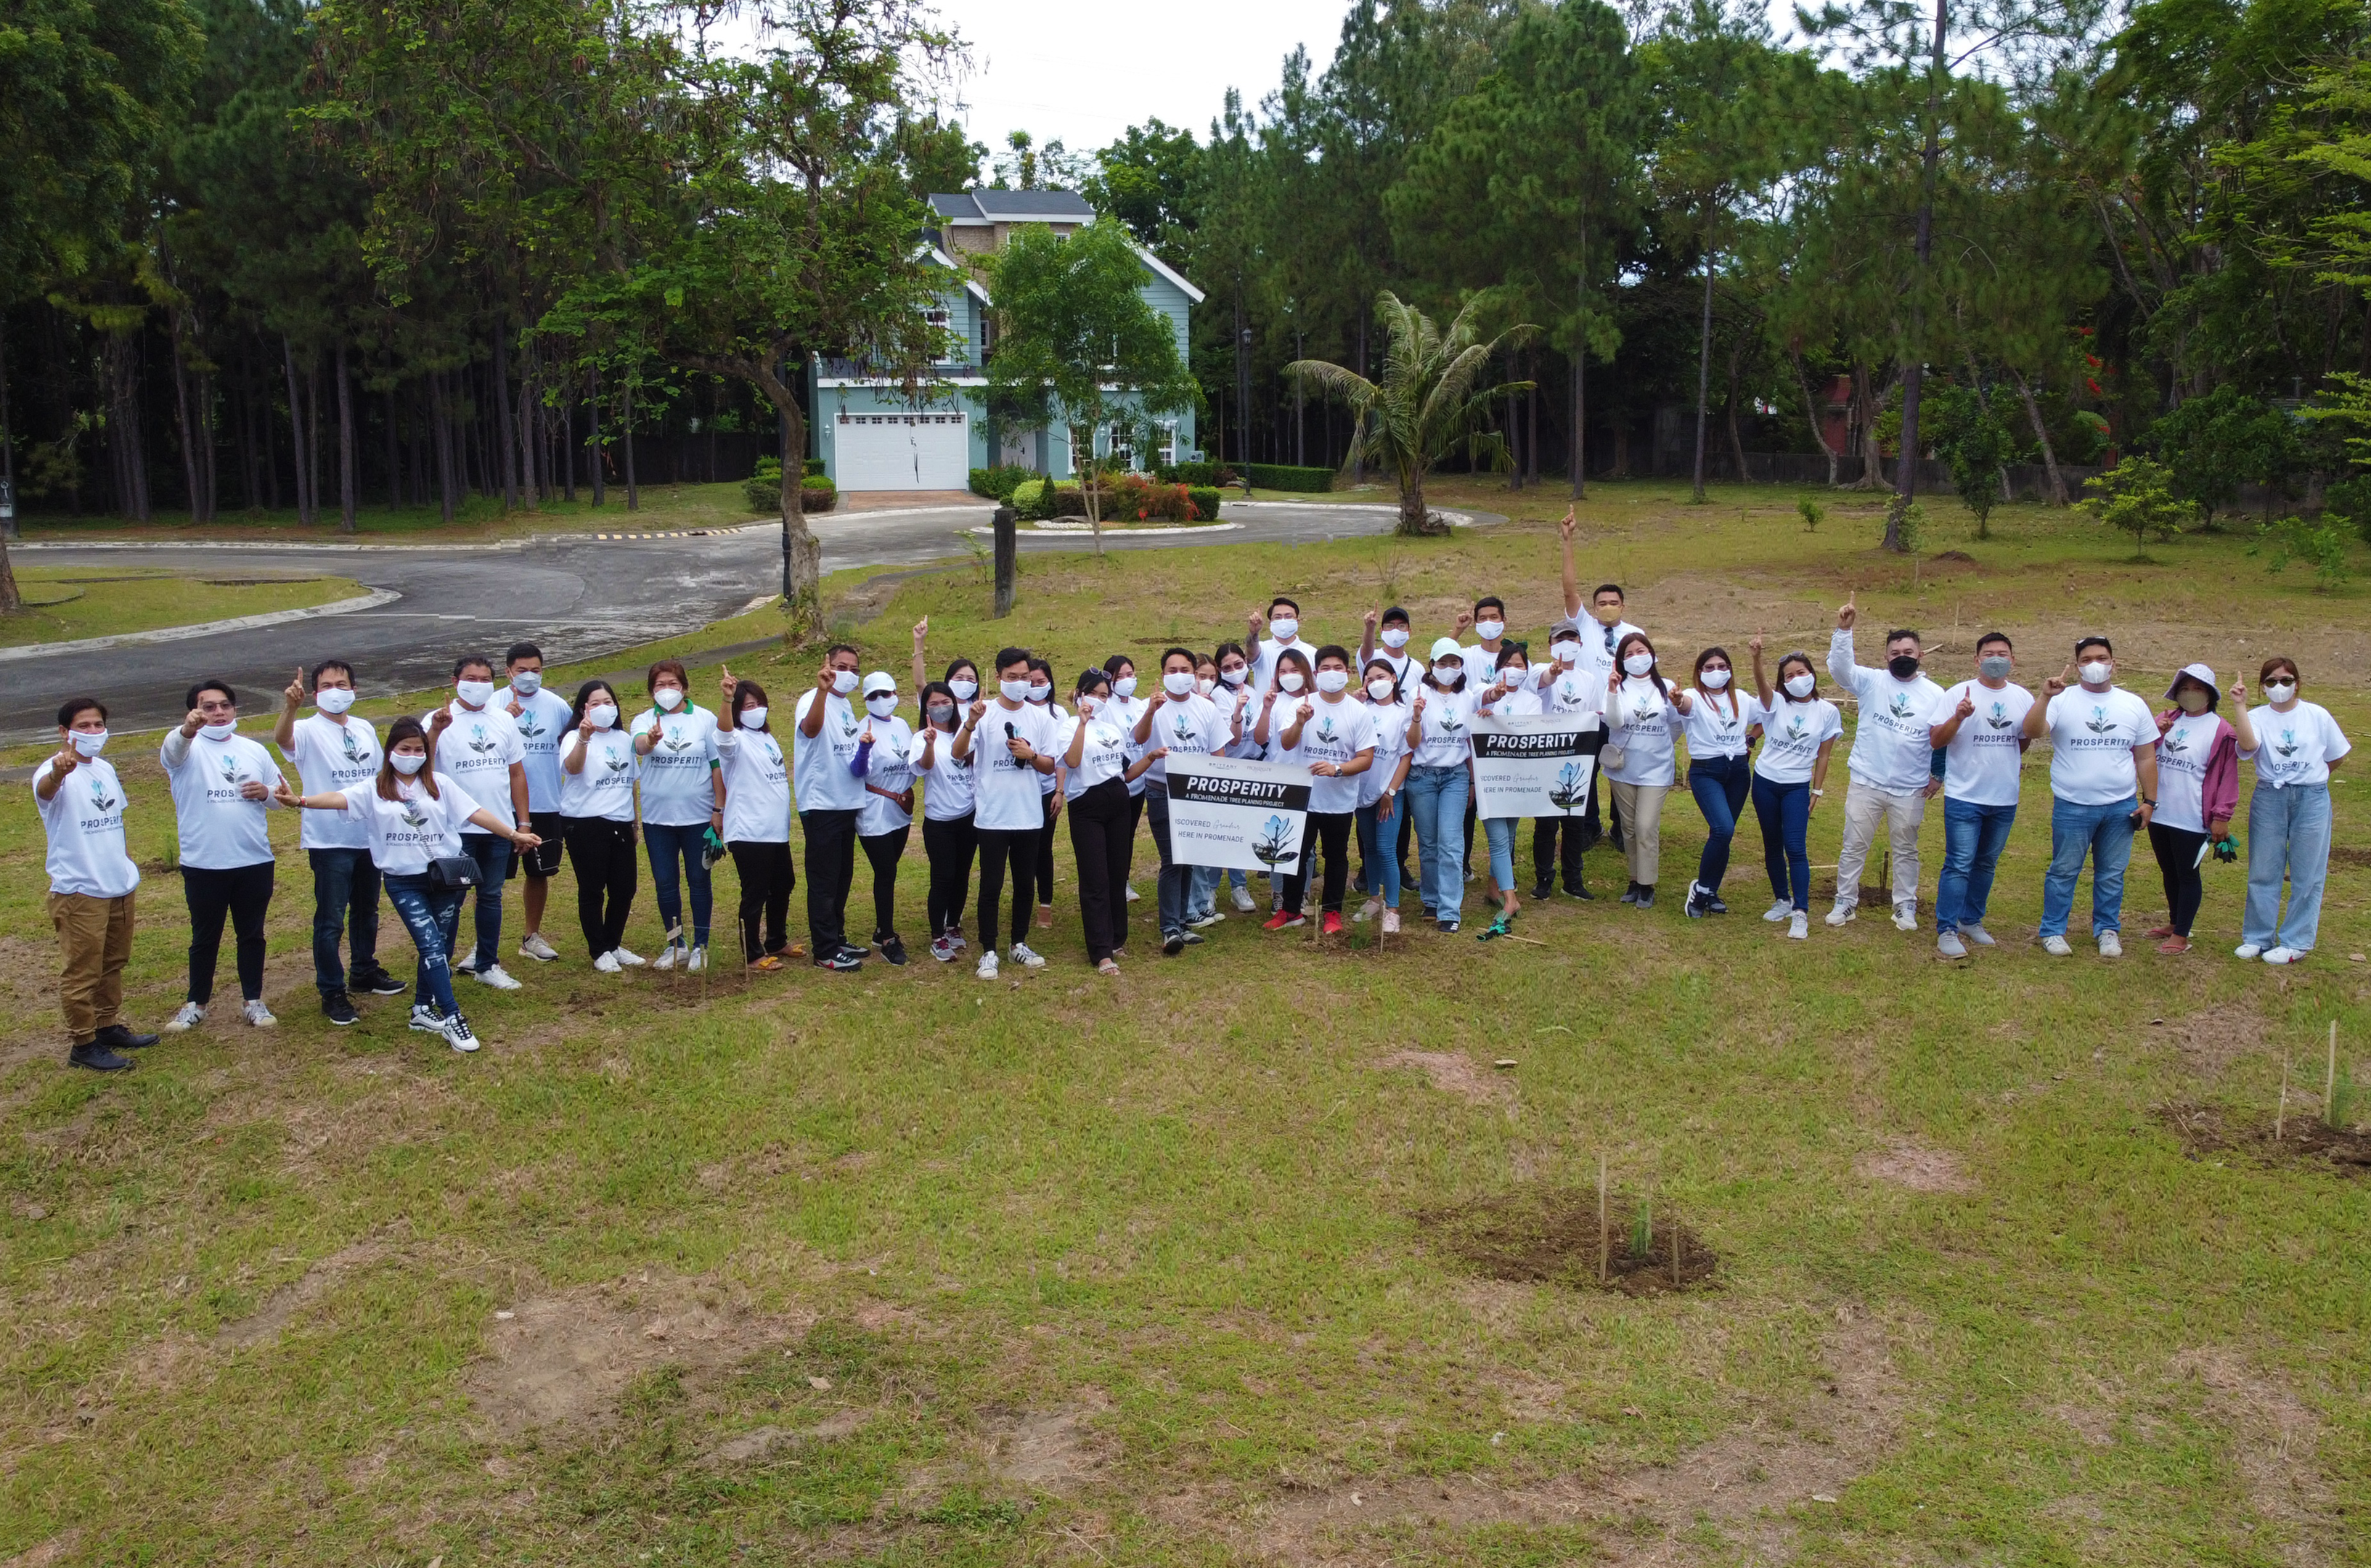 Employee, salesforce, and resident volunteers recently planted trees at Promenade in Sta. Rosa, Laguna as part of Brittany Corporation’s thrust in developing sustainable communities and promoting a more responsible lifestyle